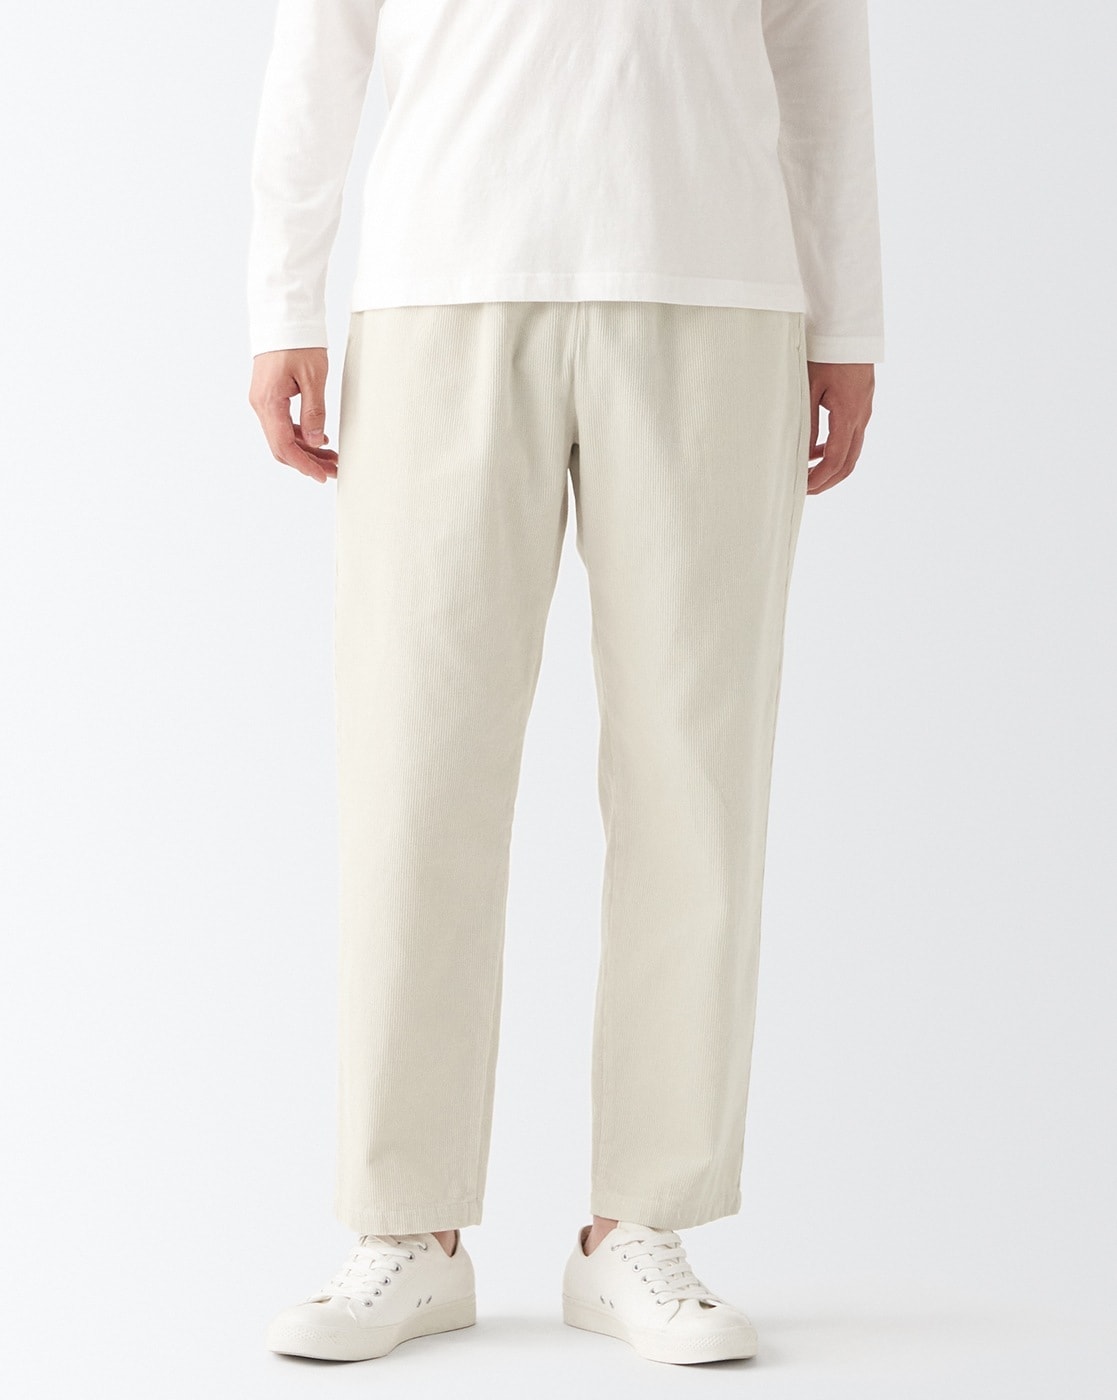 Corduroy Pants White Pants for Women - JCPenney